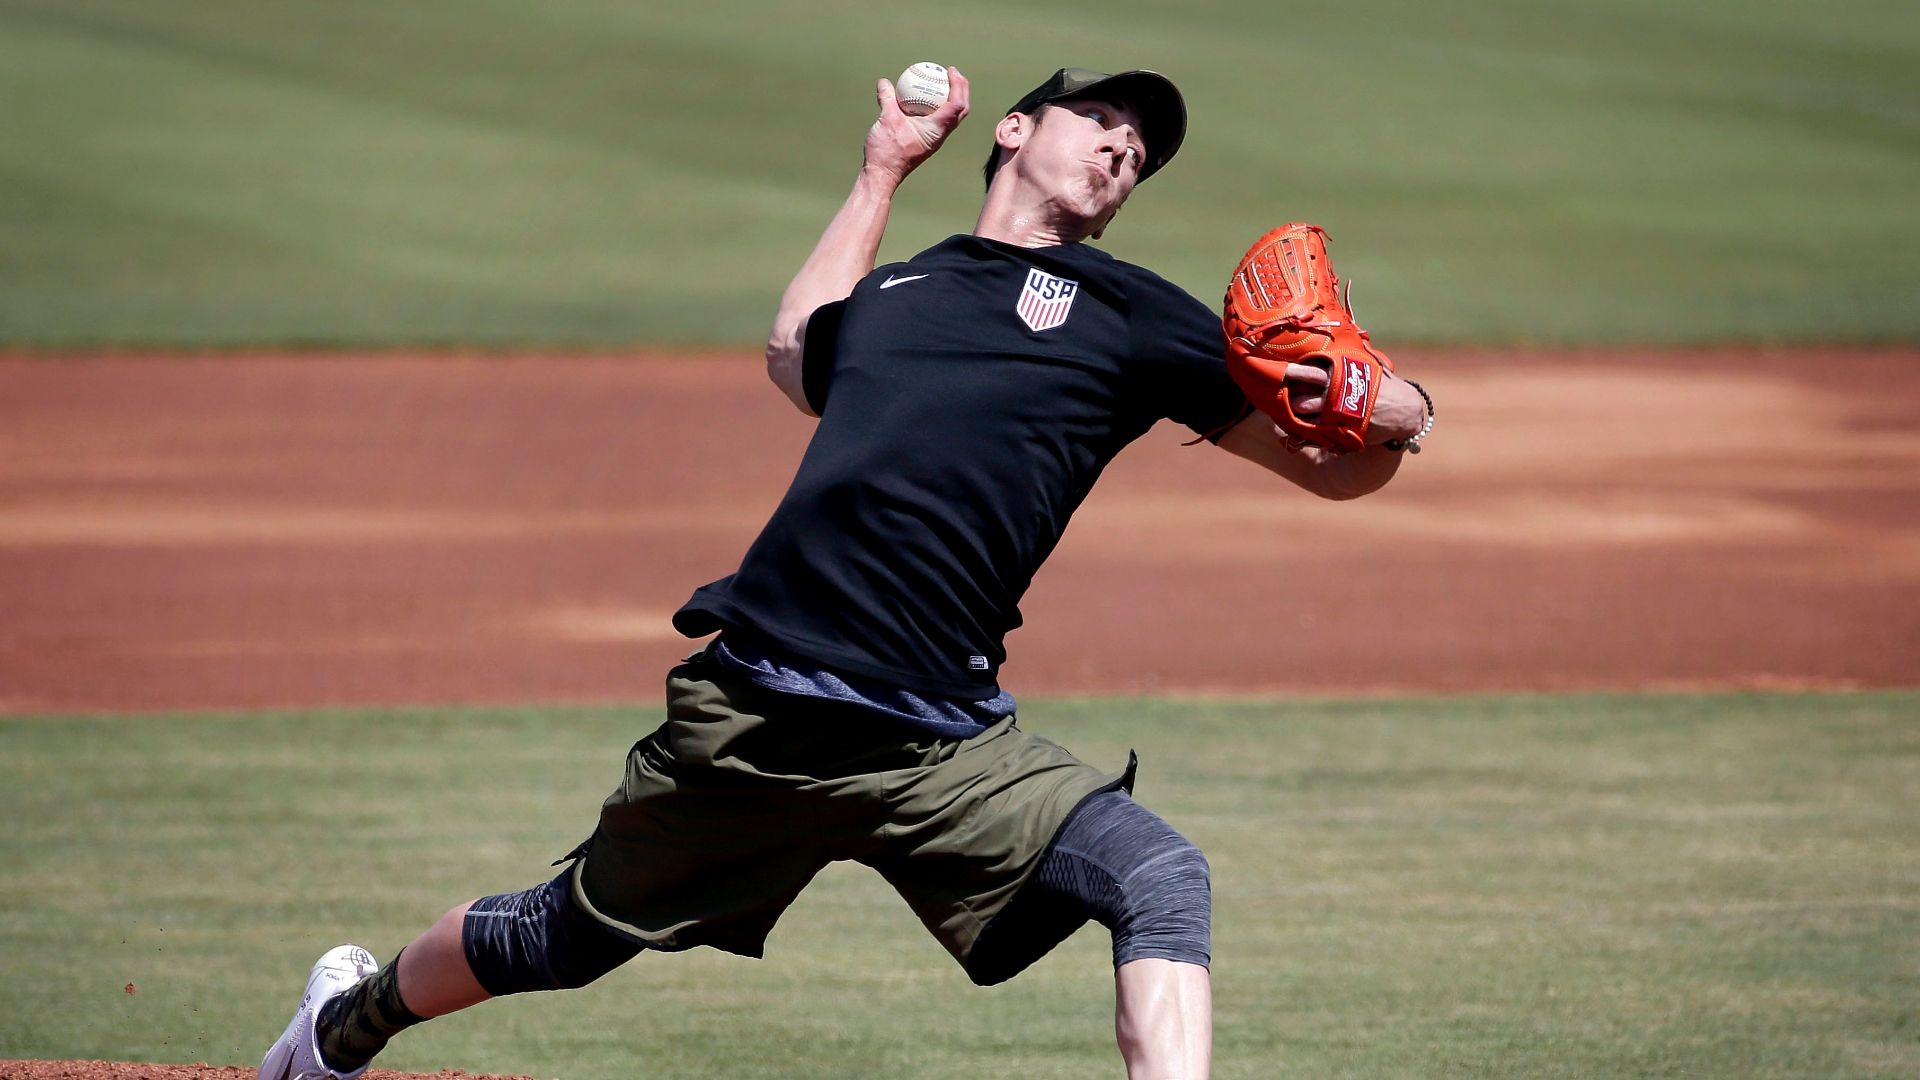 Tim Lincecum pitches Angels past A's in return